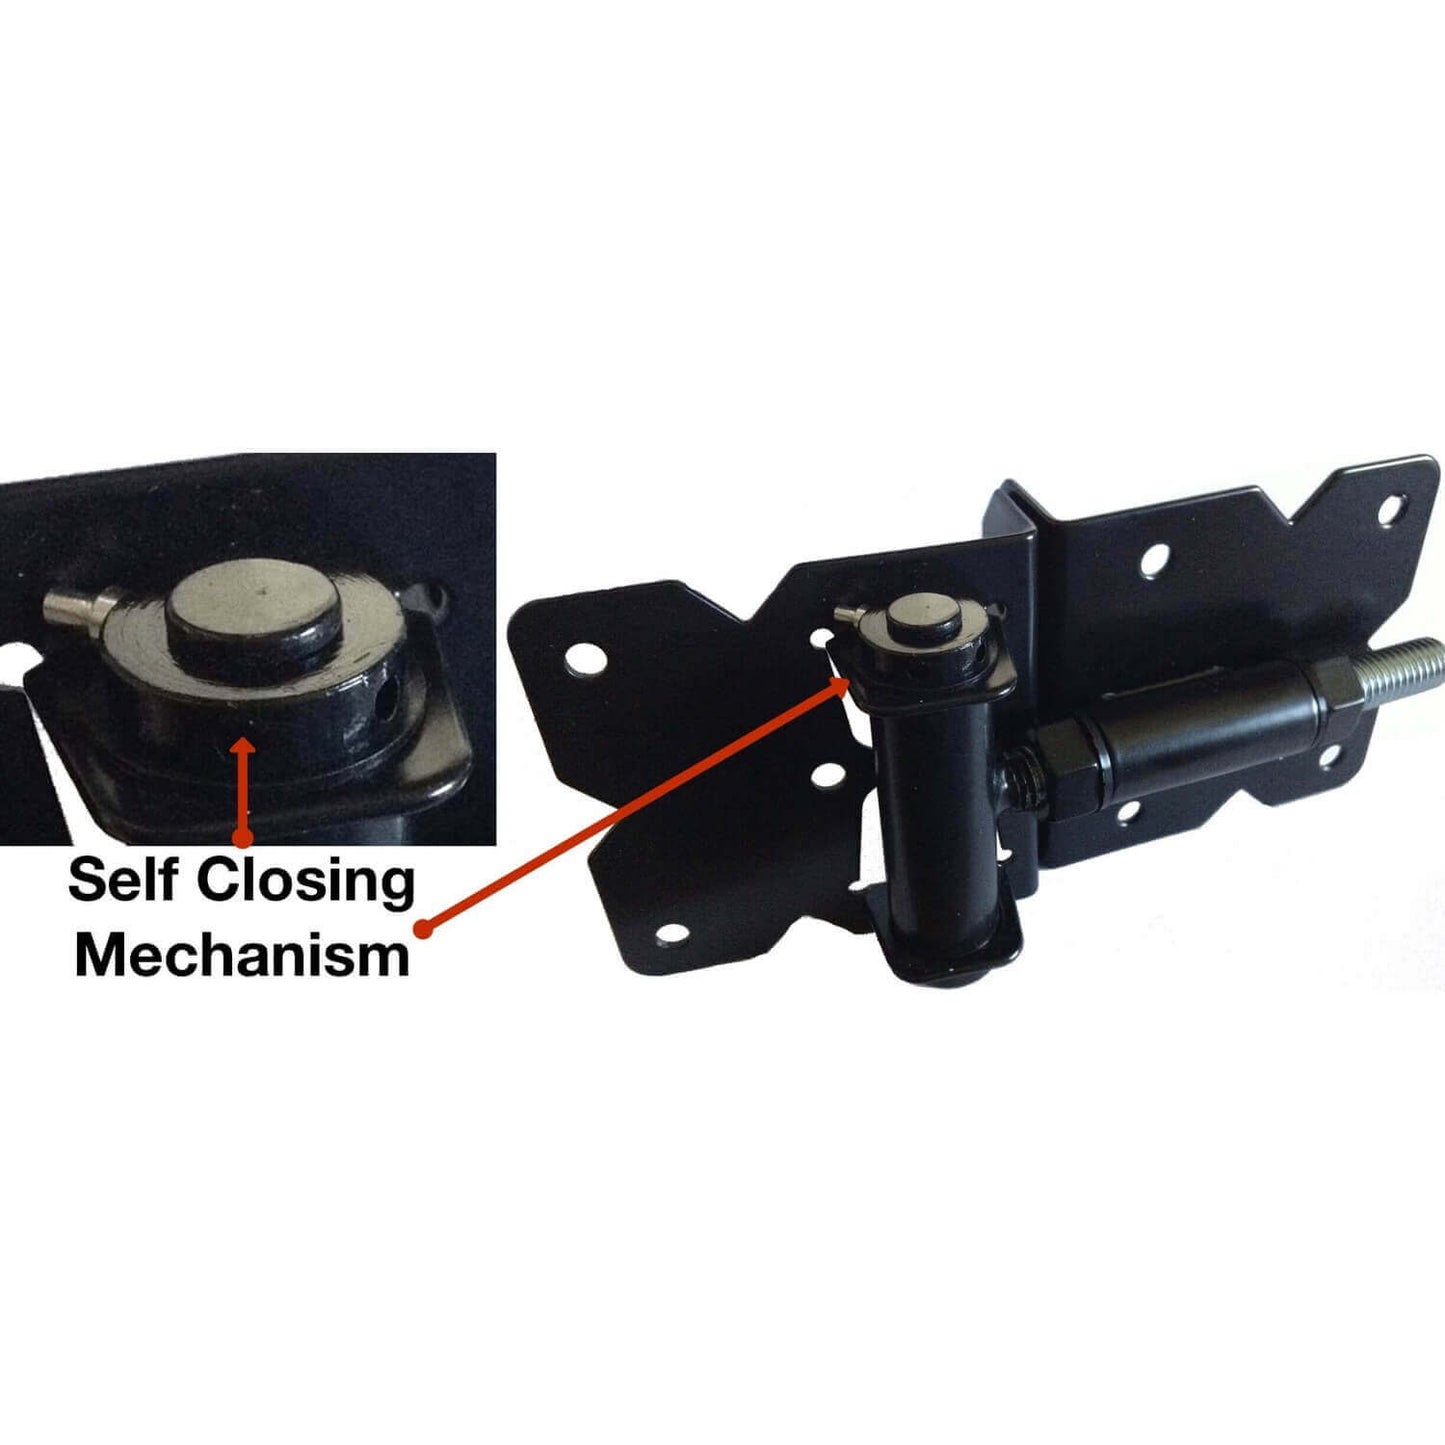 Vinyl Gate Kits in Standard and Self-Closing for Single and Double Gates. Choose from Black or White With or Without Drop Rods. Standard and Extended Gate Latches